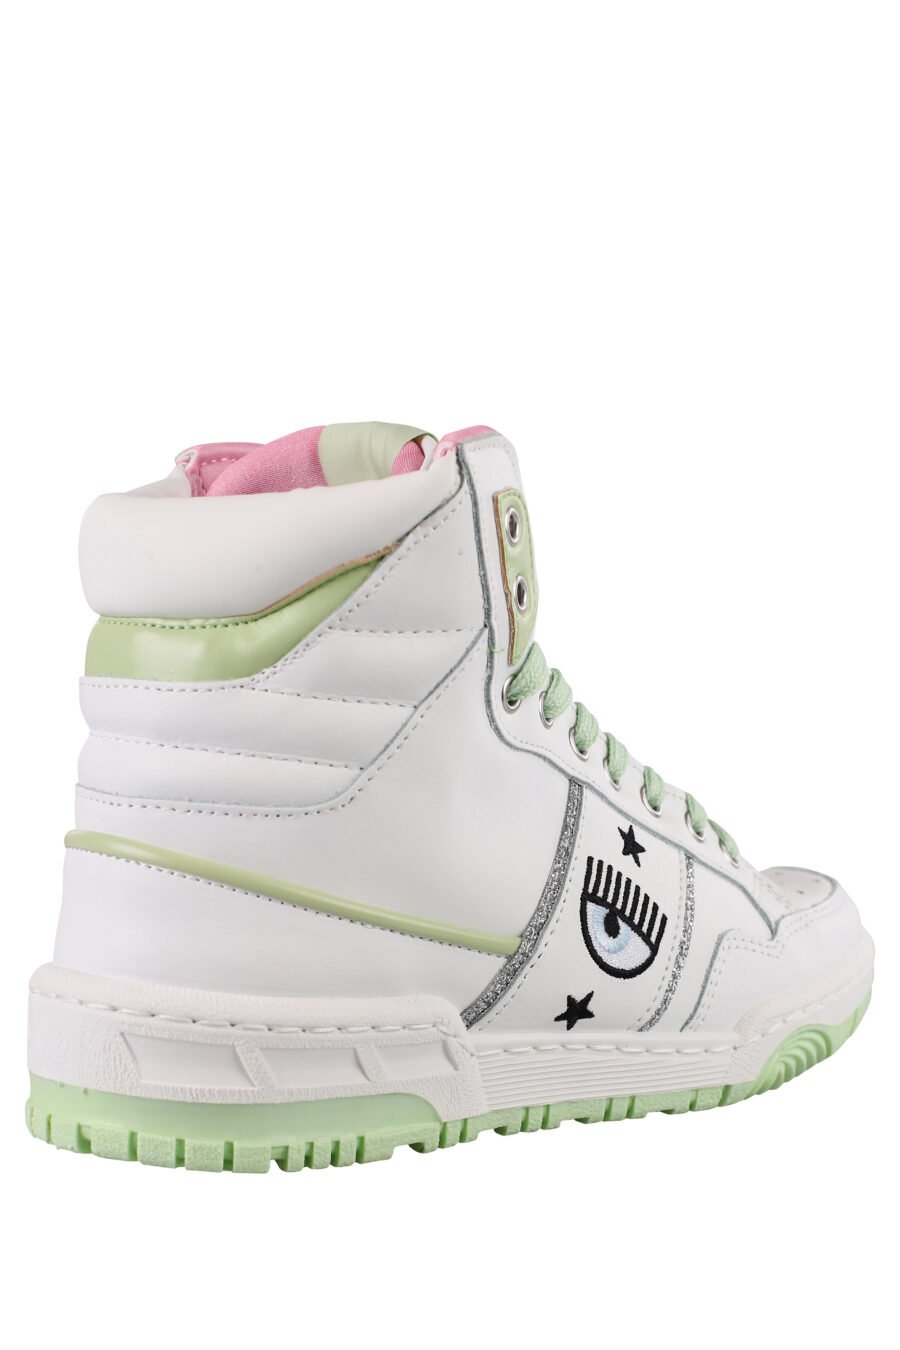 White and green trainers with eye logo and pink details - IMG 1169